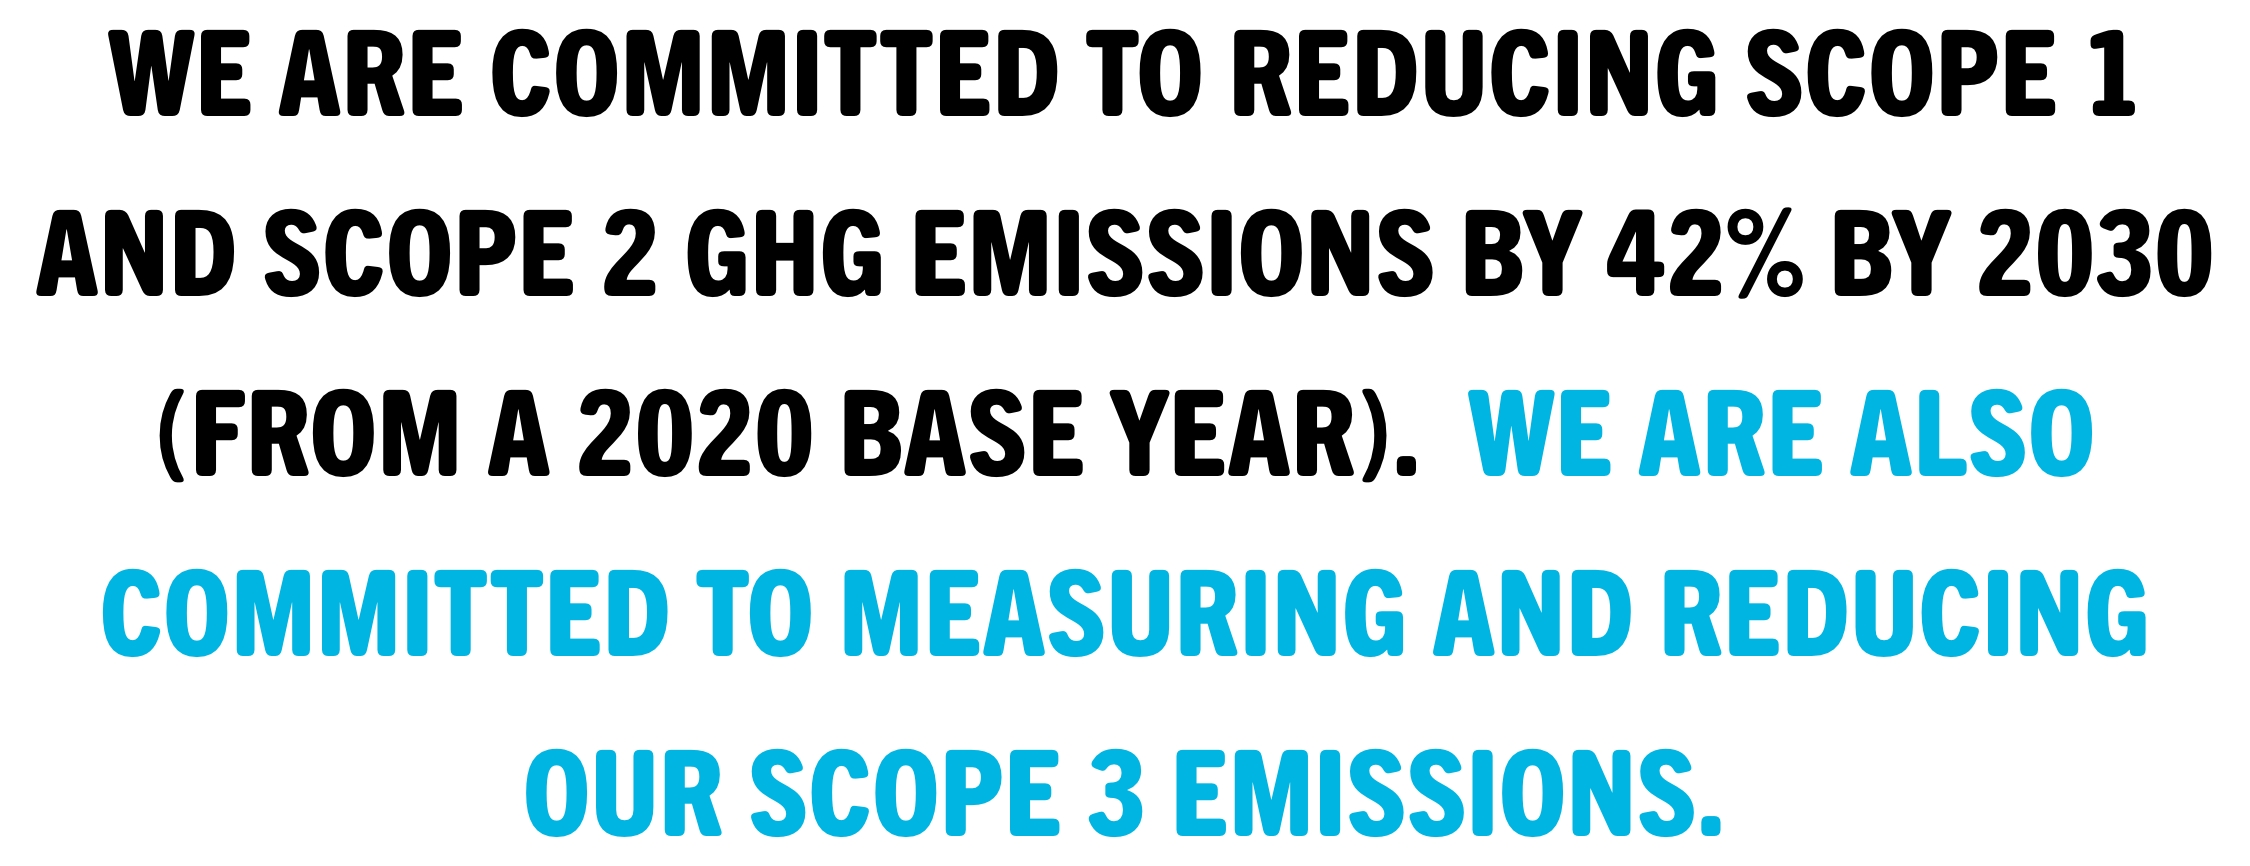 We are committed to reducing Scope 1 and Scope 2 GHG emissions to 42% by 2030 from a 2020 base year, in line with the Paris climate agreement. We are also committed to measuring and reducing our Scope 3 emissions.